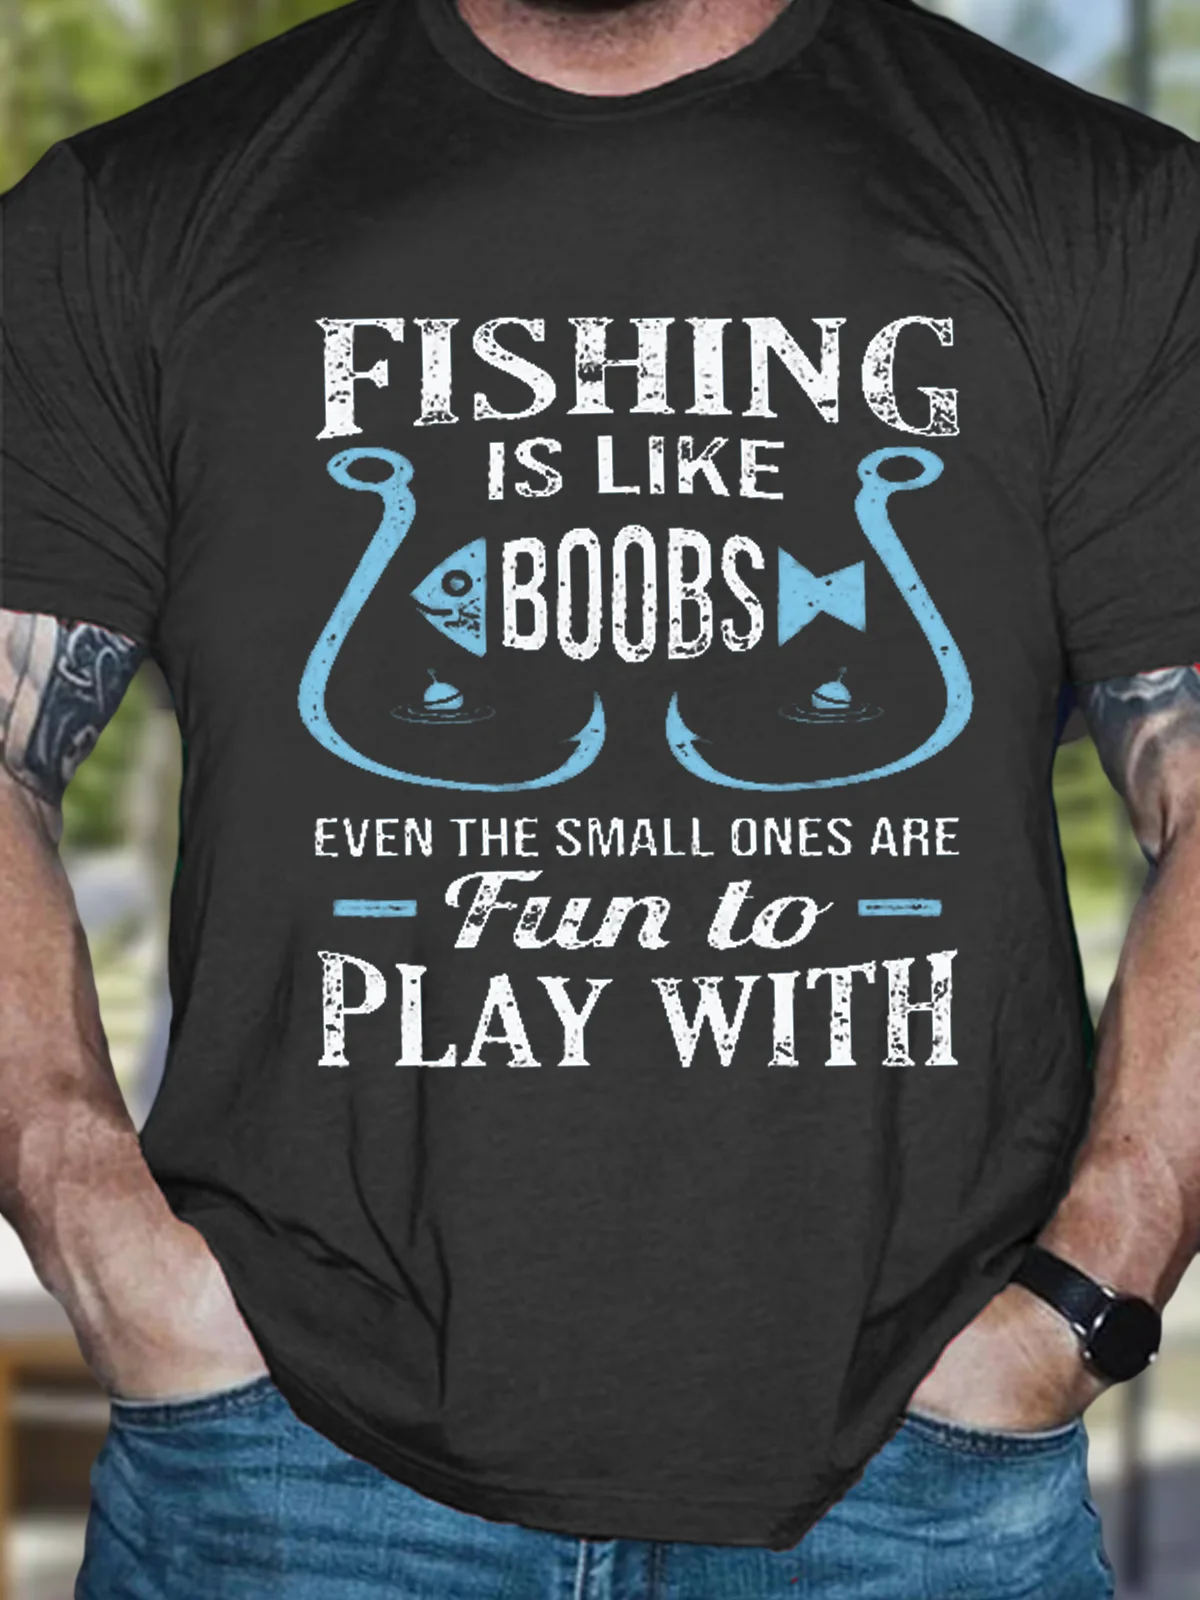 Funny Fishing Text Letters Casual Crew Neck Cotton T-Shirt